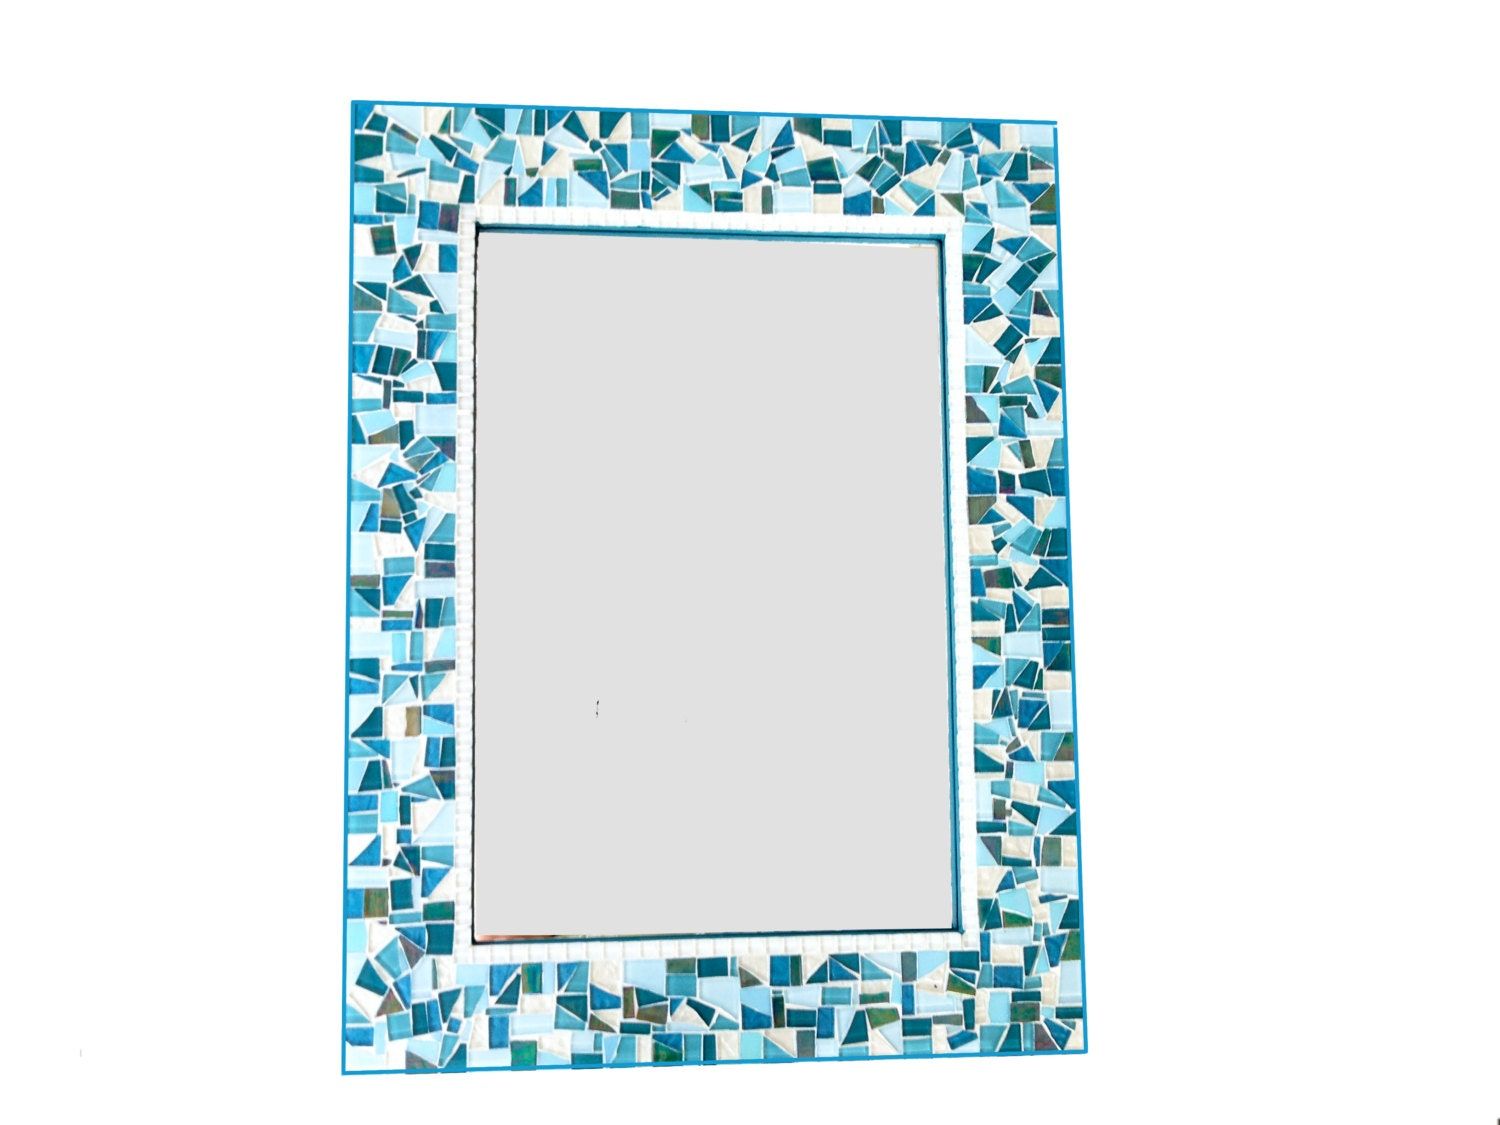 Turquoise Teal And Blue Large Mosaic Wall Mirror Intended For Blue Green Wall Mirrors (View 9 of 15)